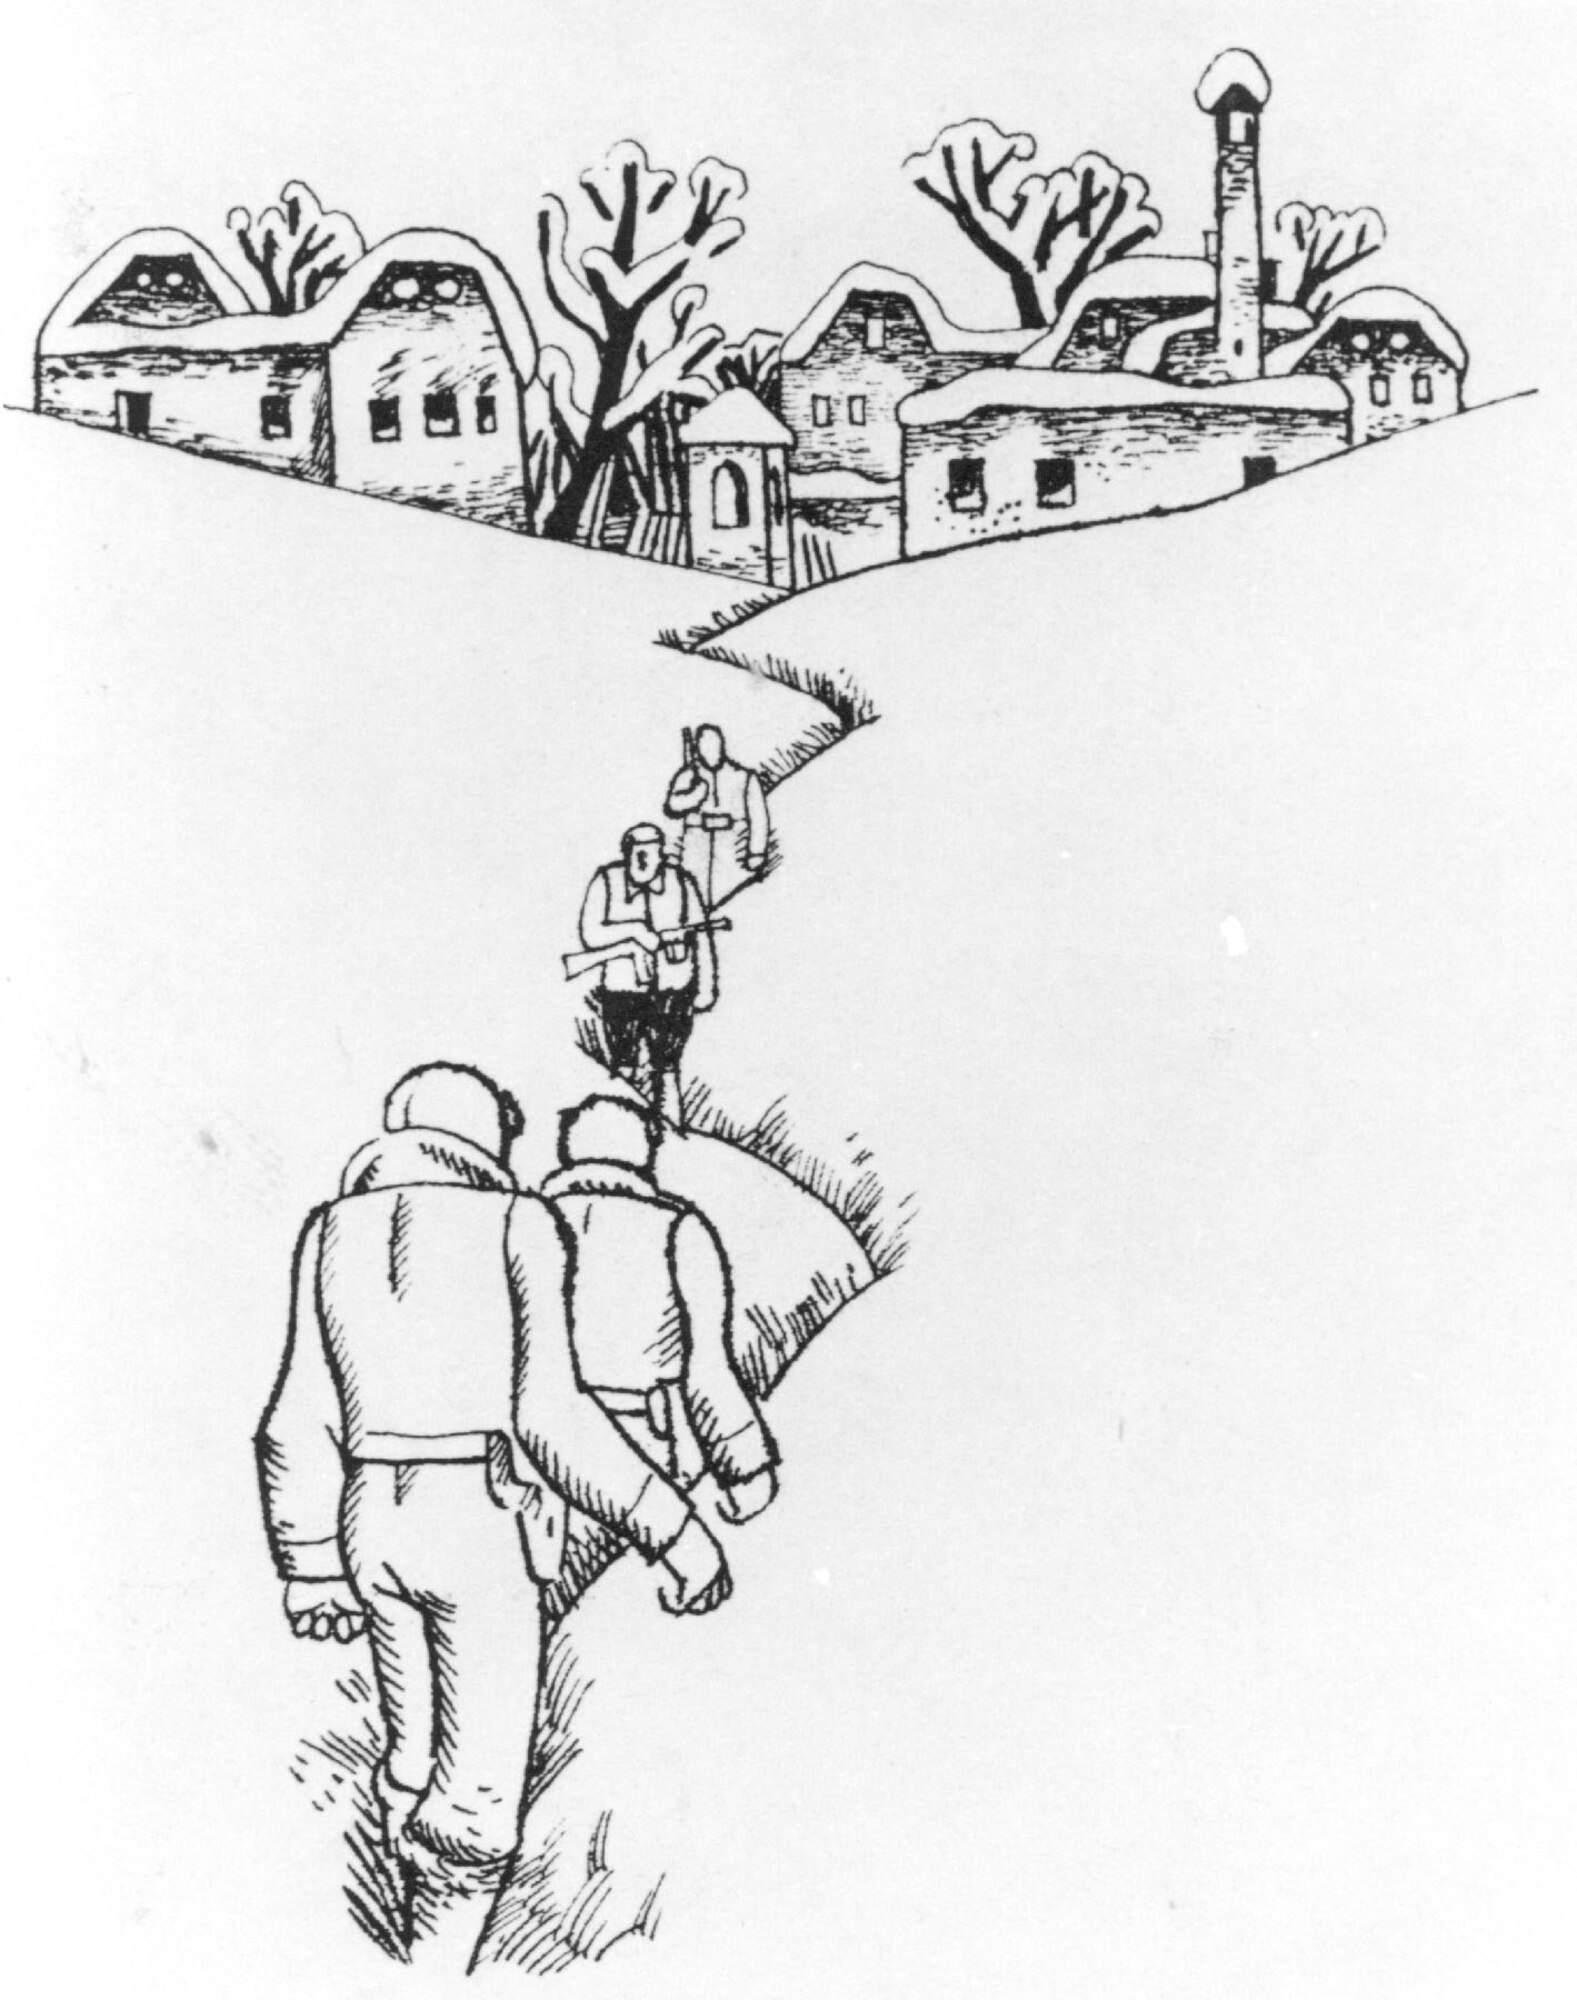 Like their western European counterparts, resistance fighters in the Balkans offered assistance to downed Airmen. On March 19, 1944, partisan painter Ive Subic and a courier came across two USAAF B-24 crewmen who had been shot down over Slovenia. Subic drew an illustration of the encounter. (U.S. Air Force)